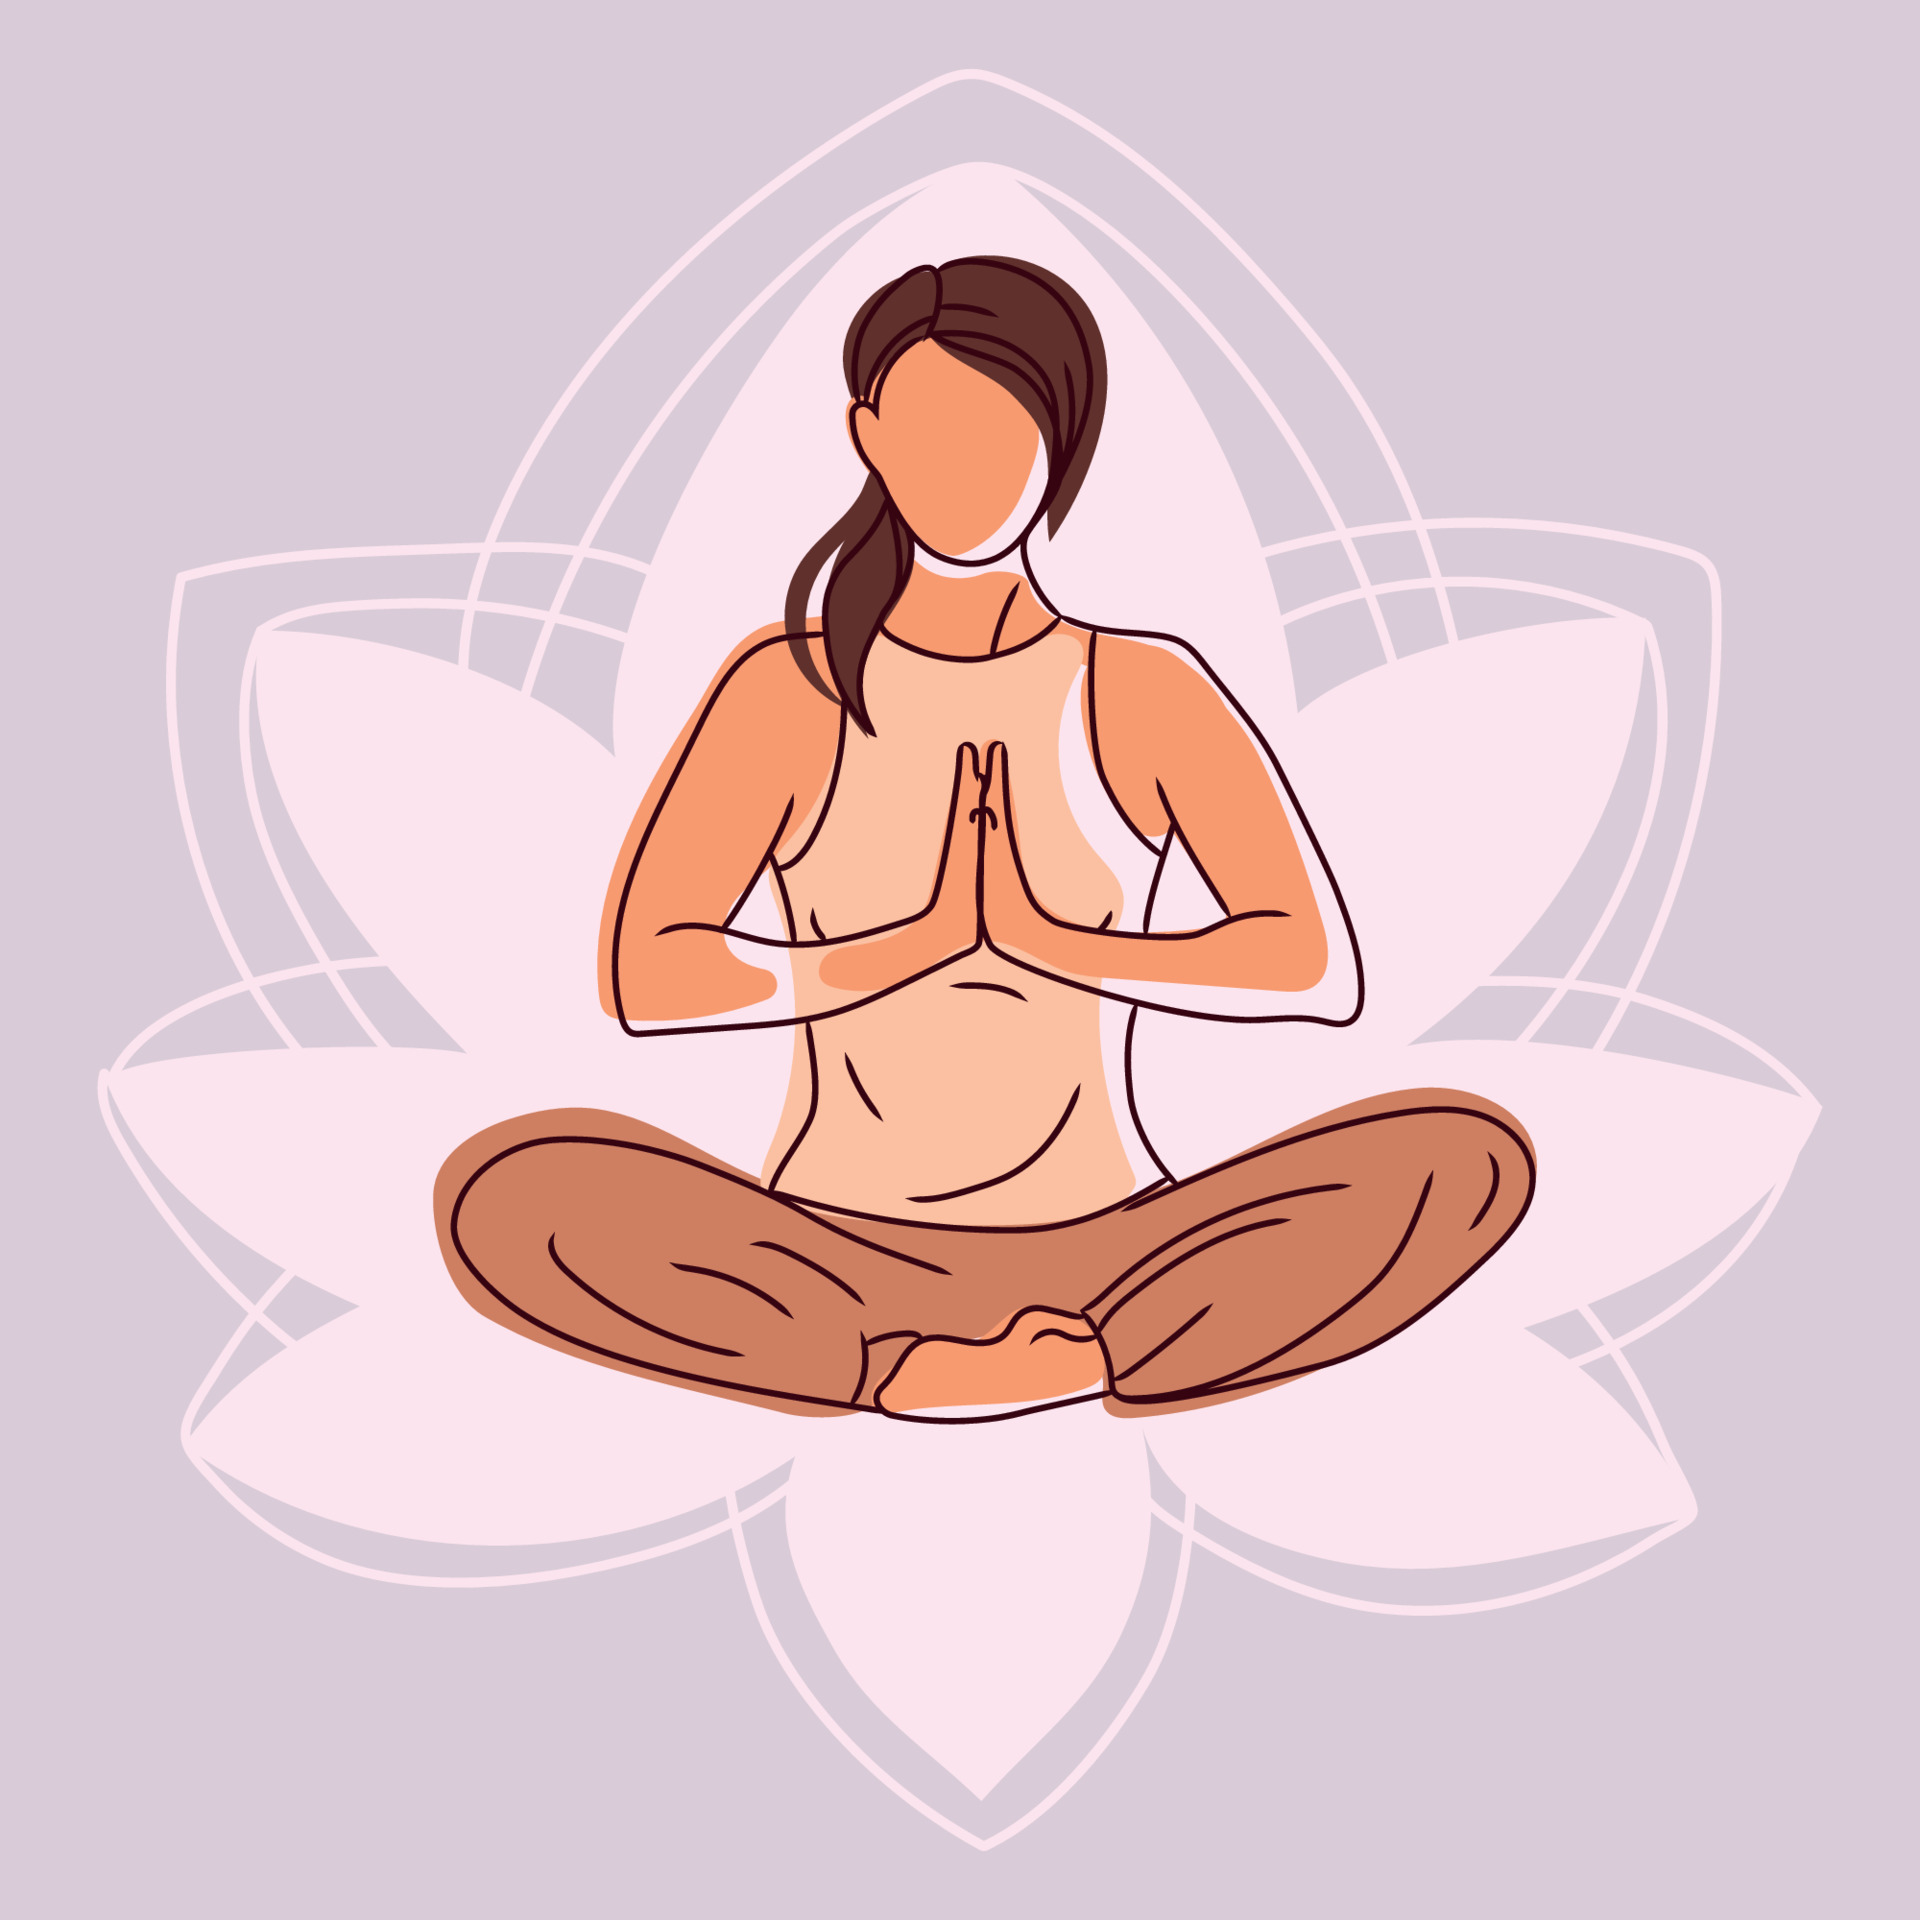 Outline Figure of a Man Sitting in Lotus Pose on a Transparent